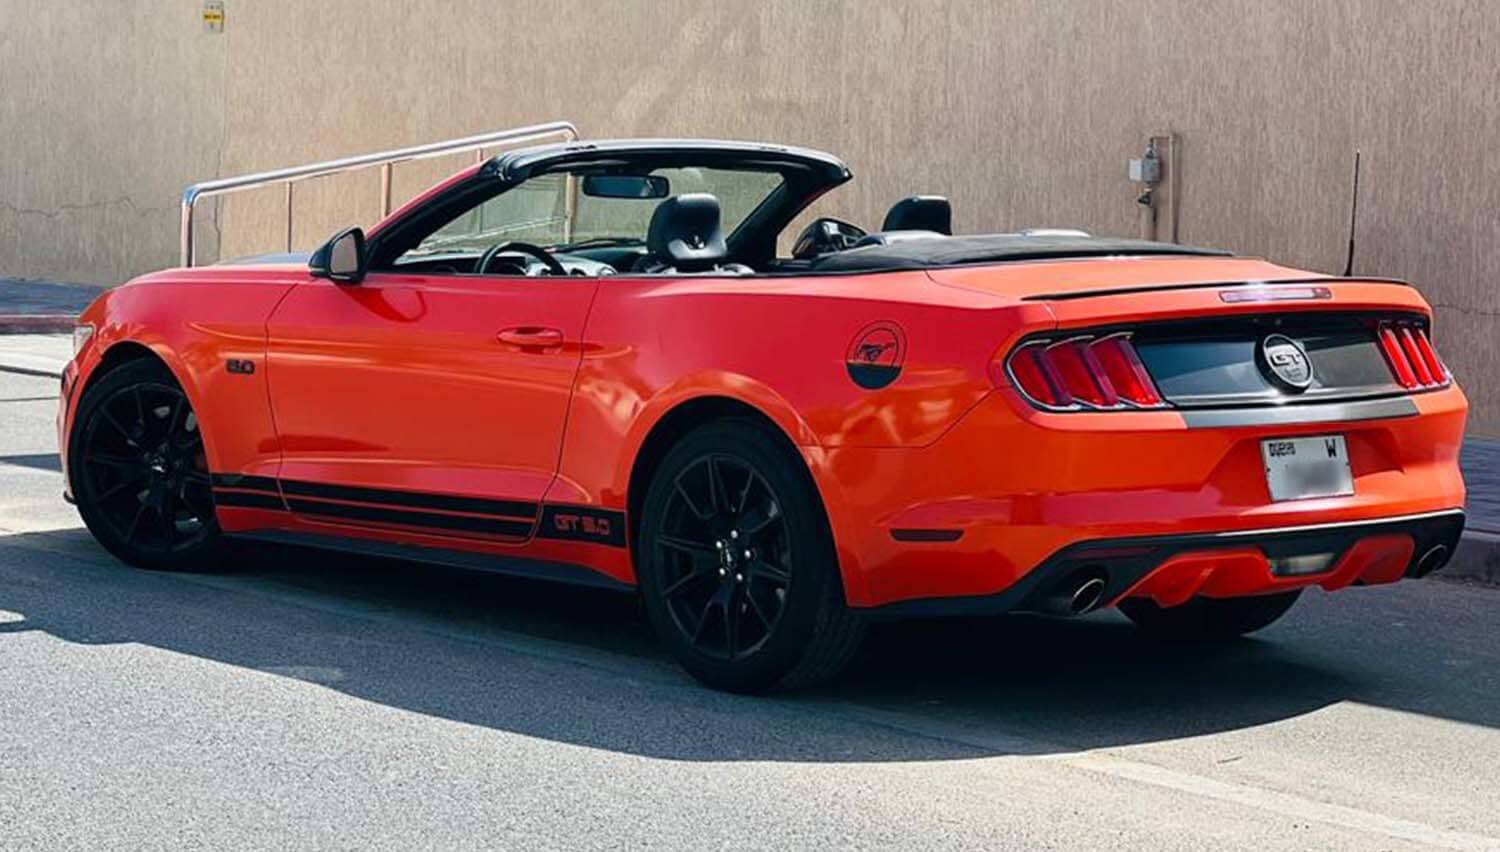 Ford Mustang GT 5.0 Convertible Location Dubaï